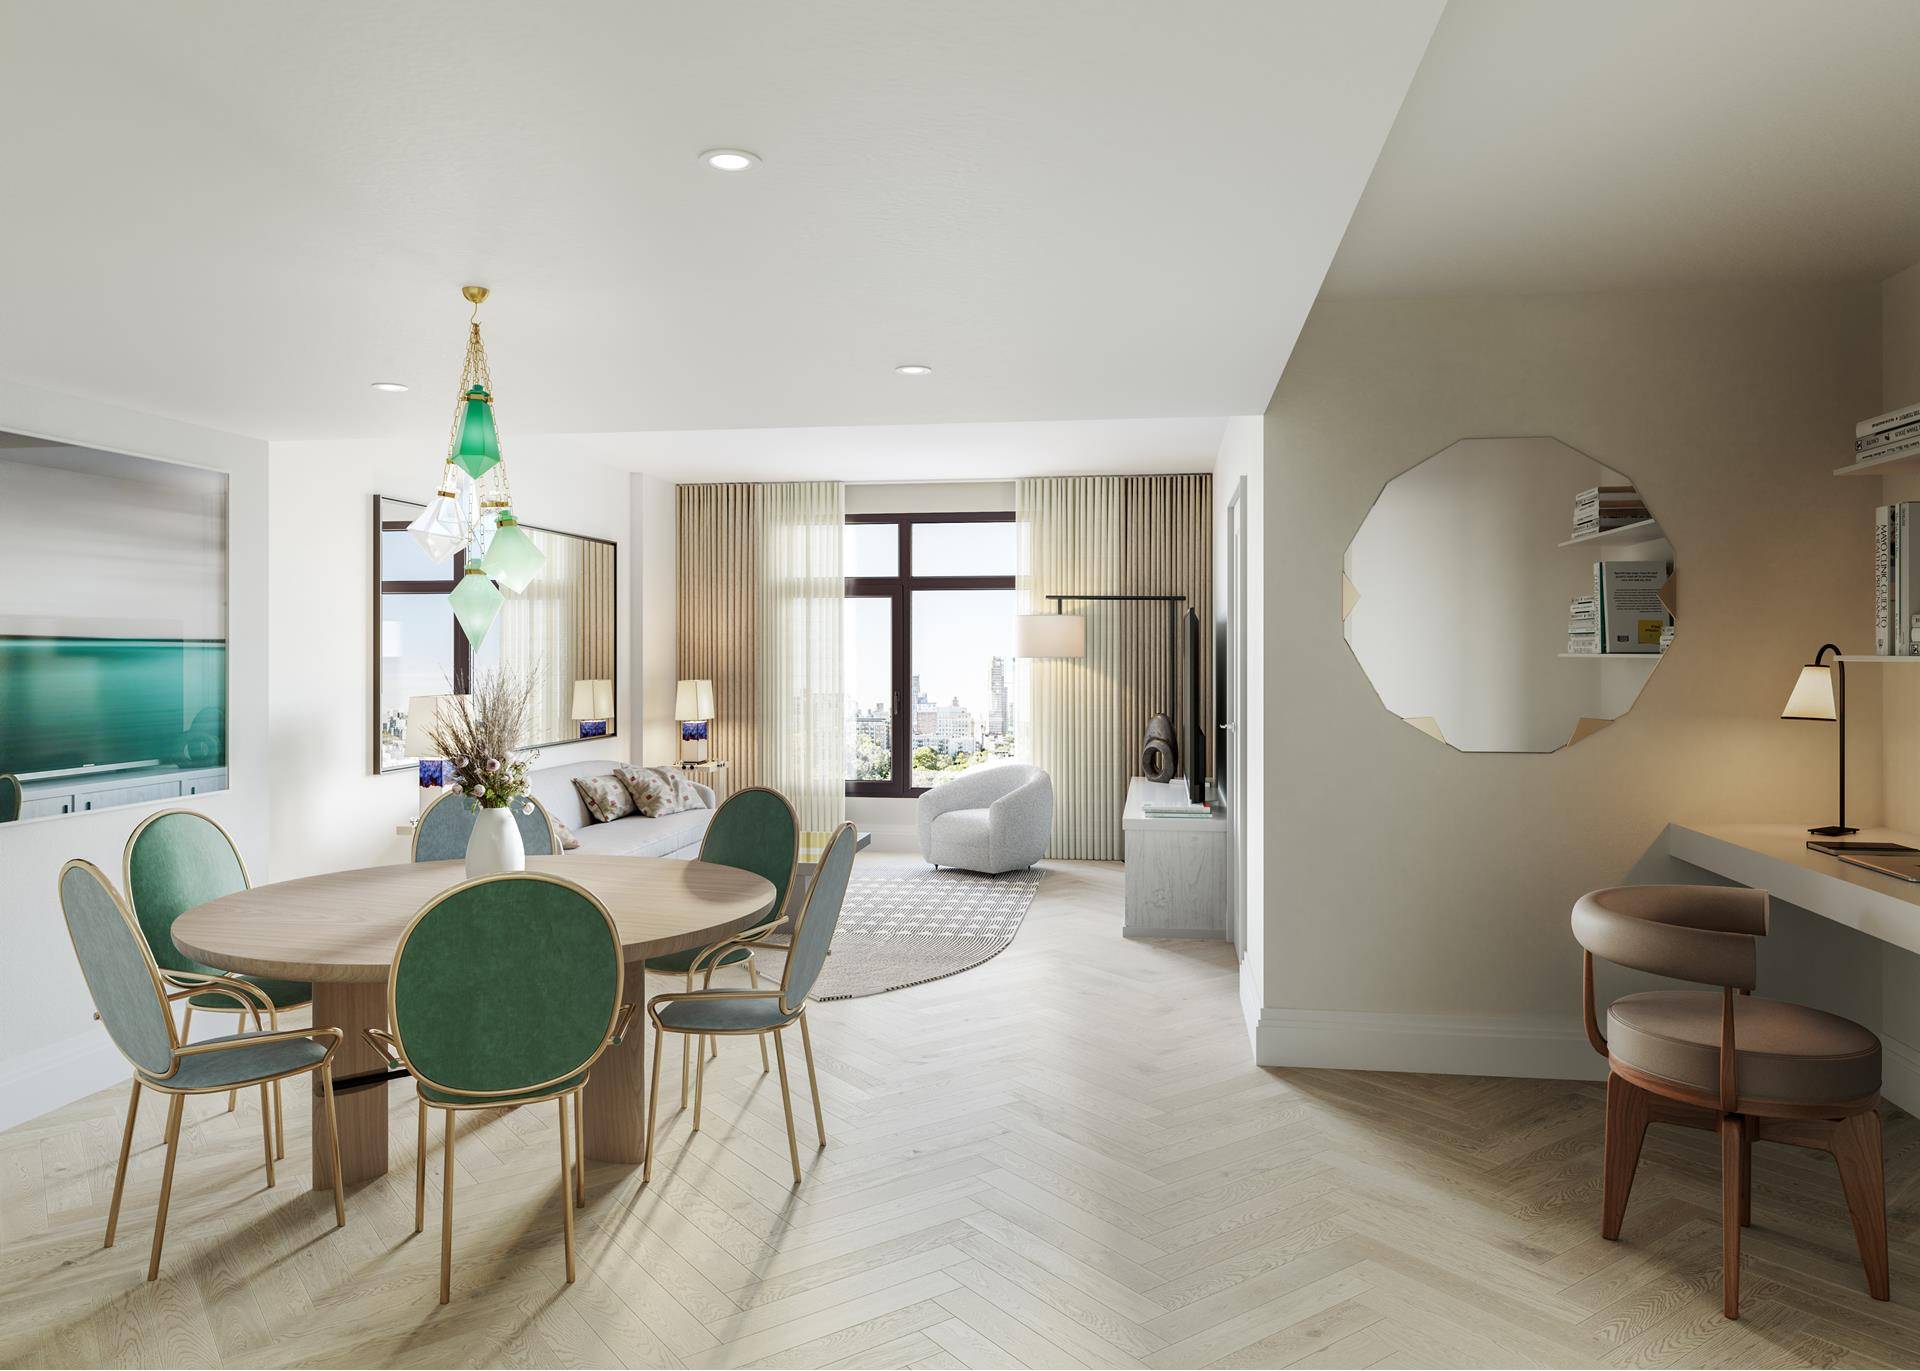 Sales Gallery Now Open By Appointment Introducing residence 4E at 300 West, an east facing studio offering an open concept living area that boasts custom White Oak herringbone flooring, central ...